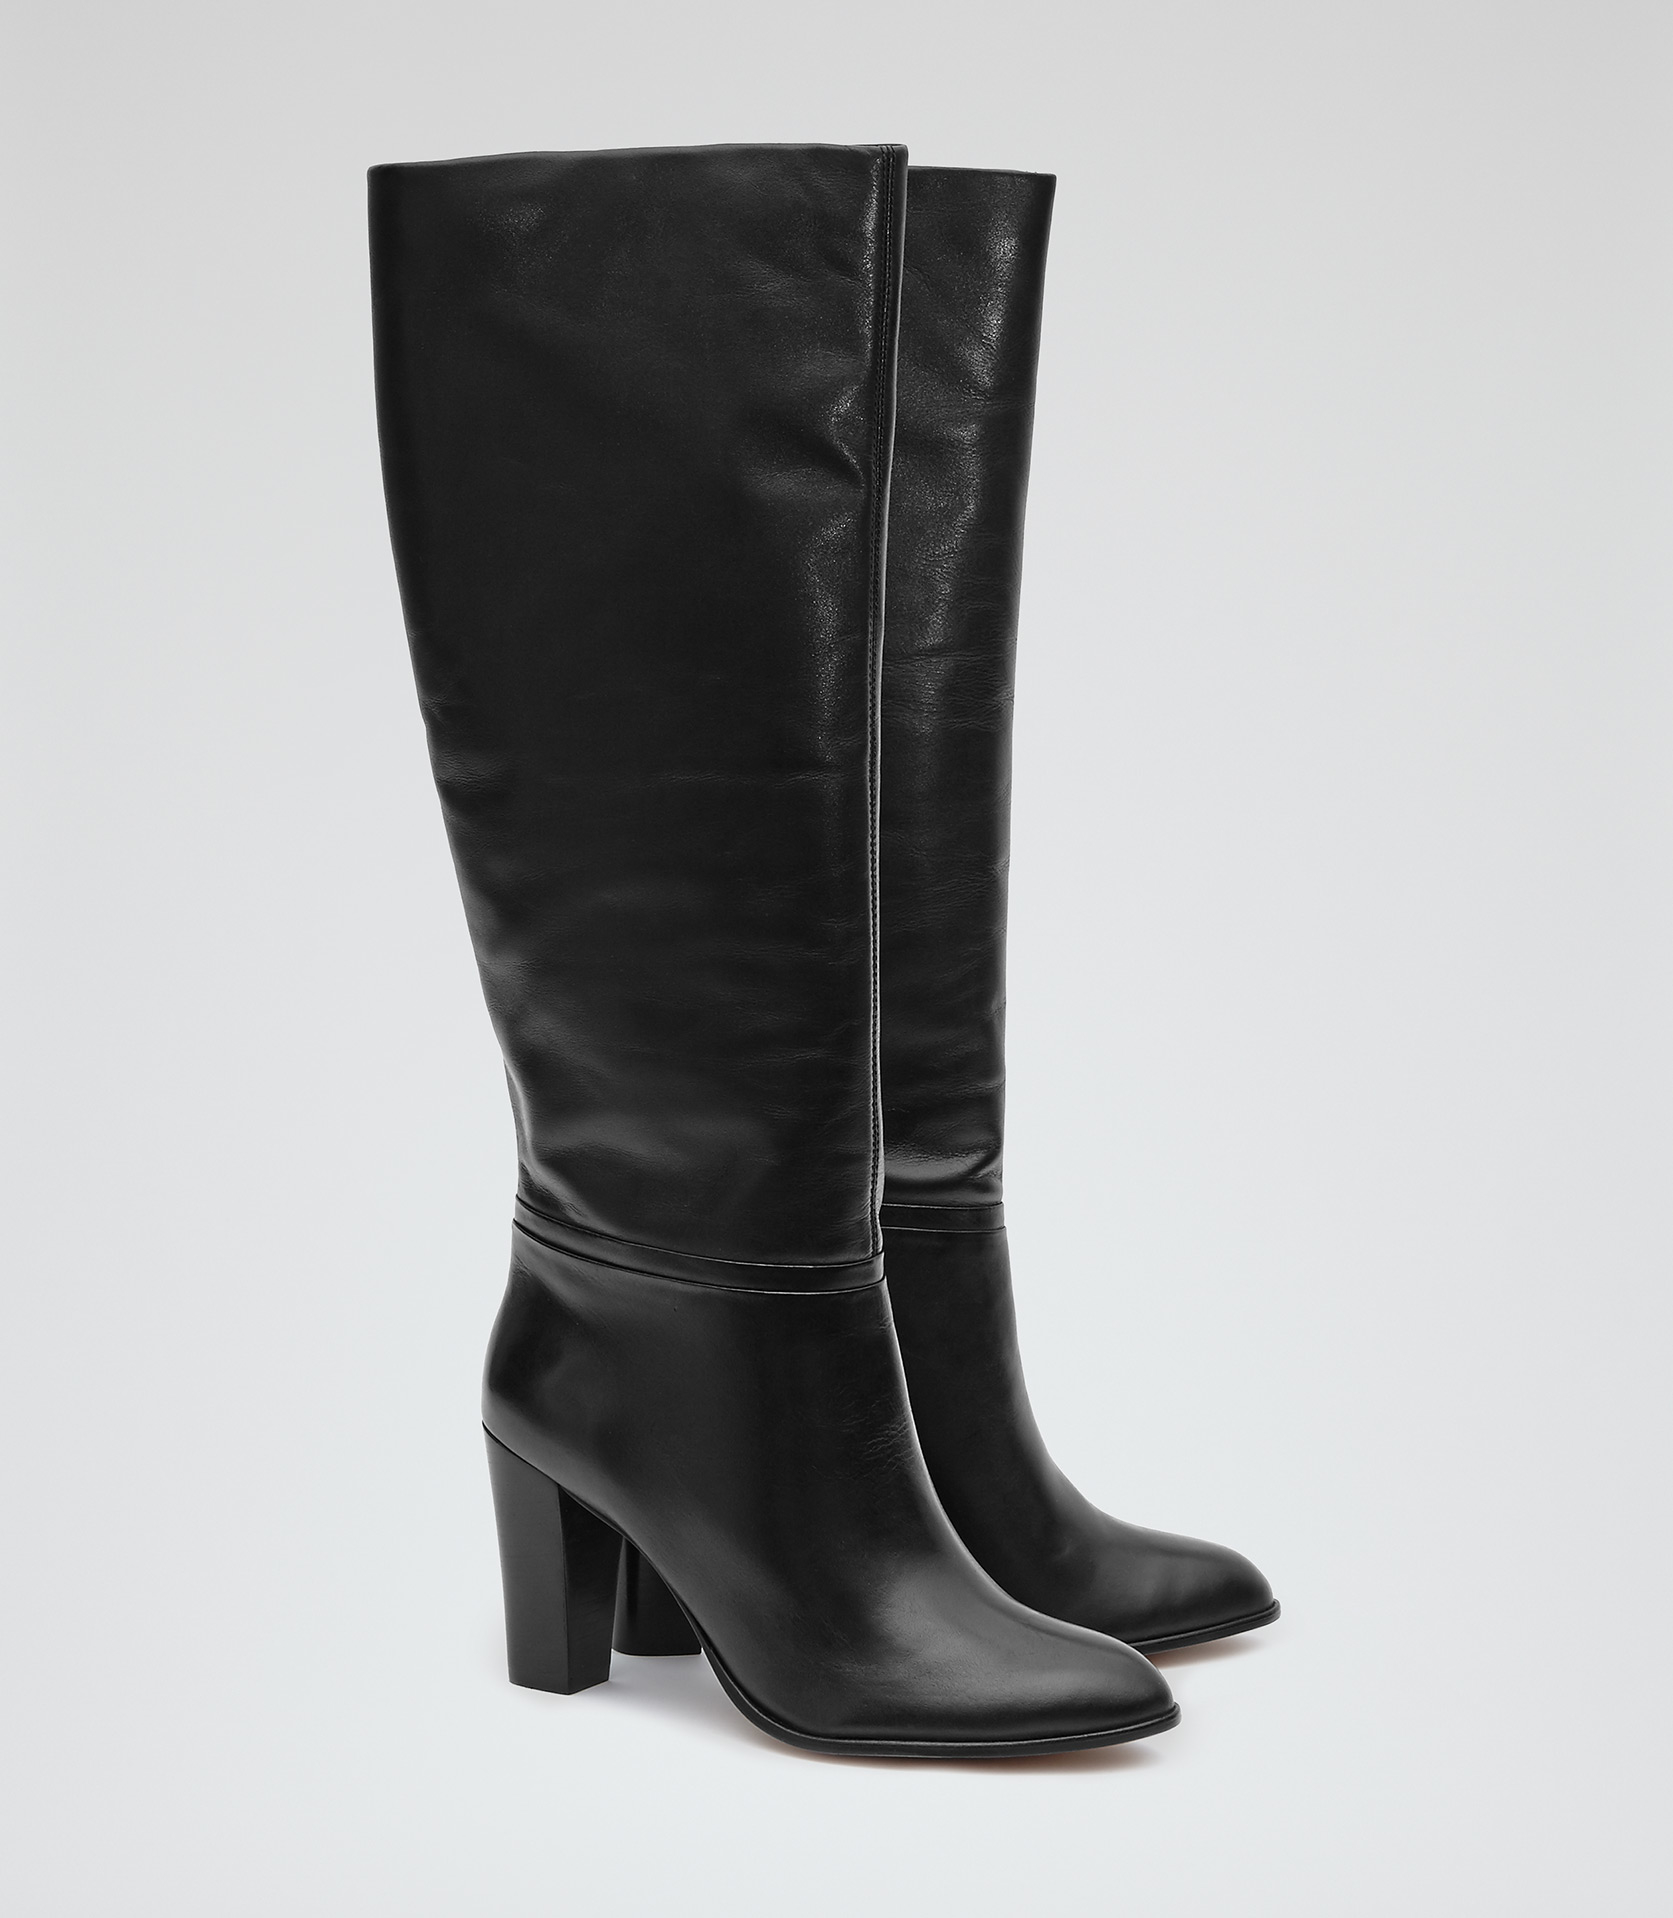 Reiss Andi Knee-high Leather Boots in Black - Lyst